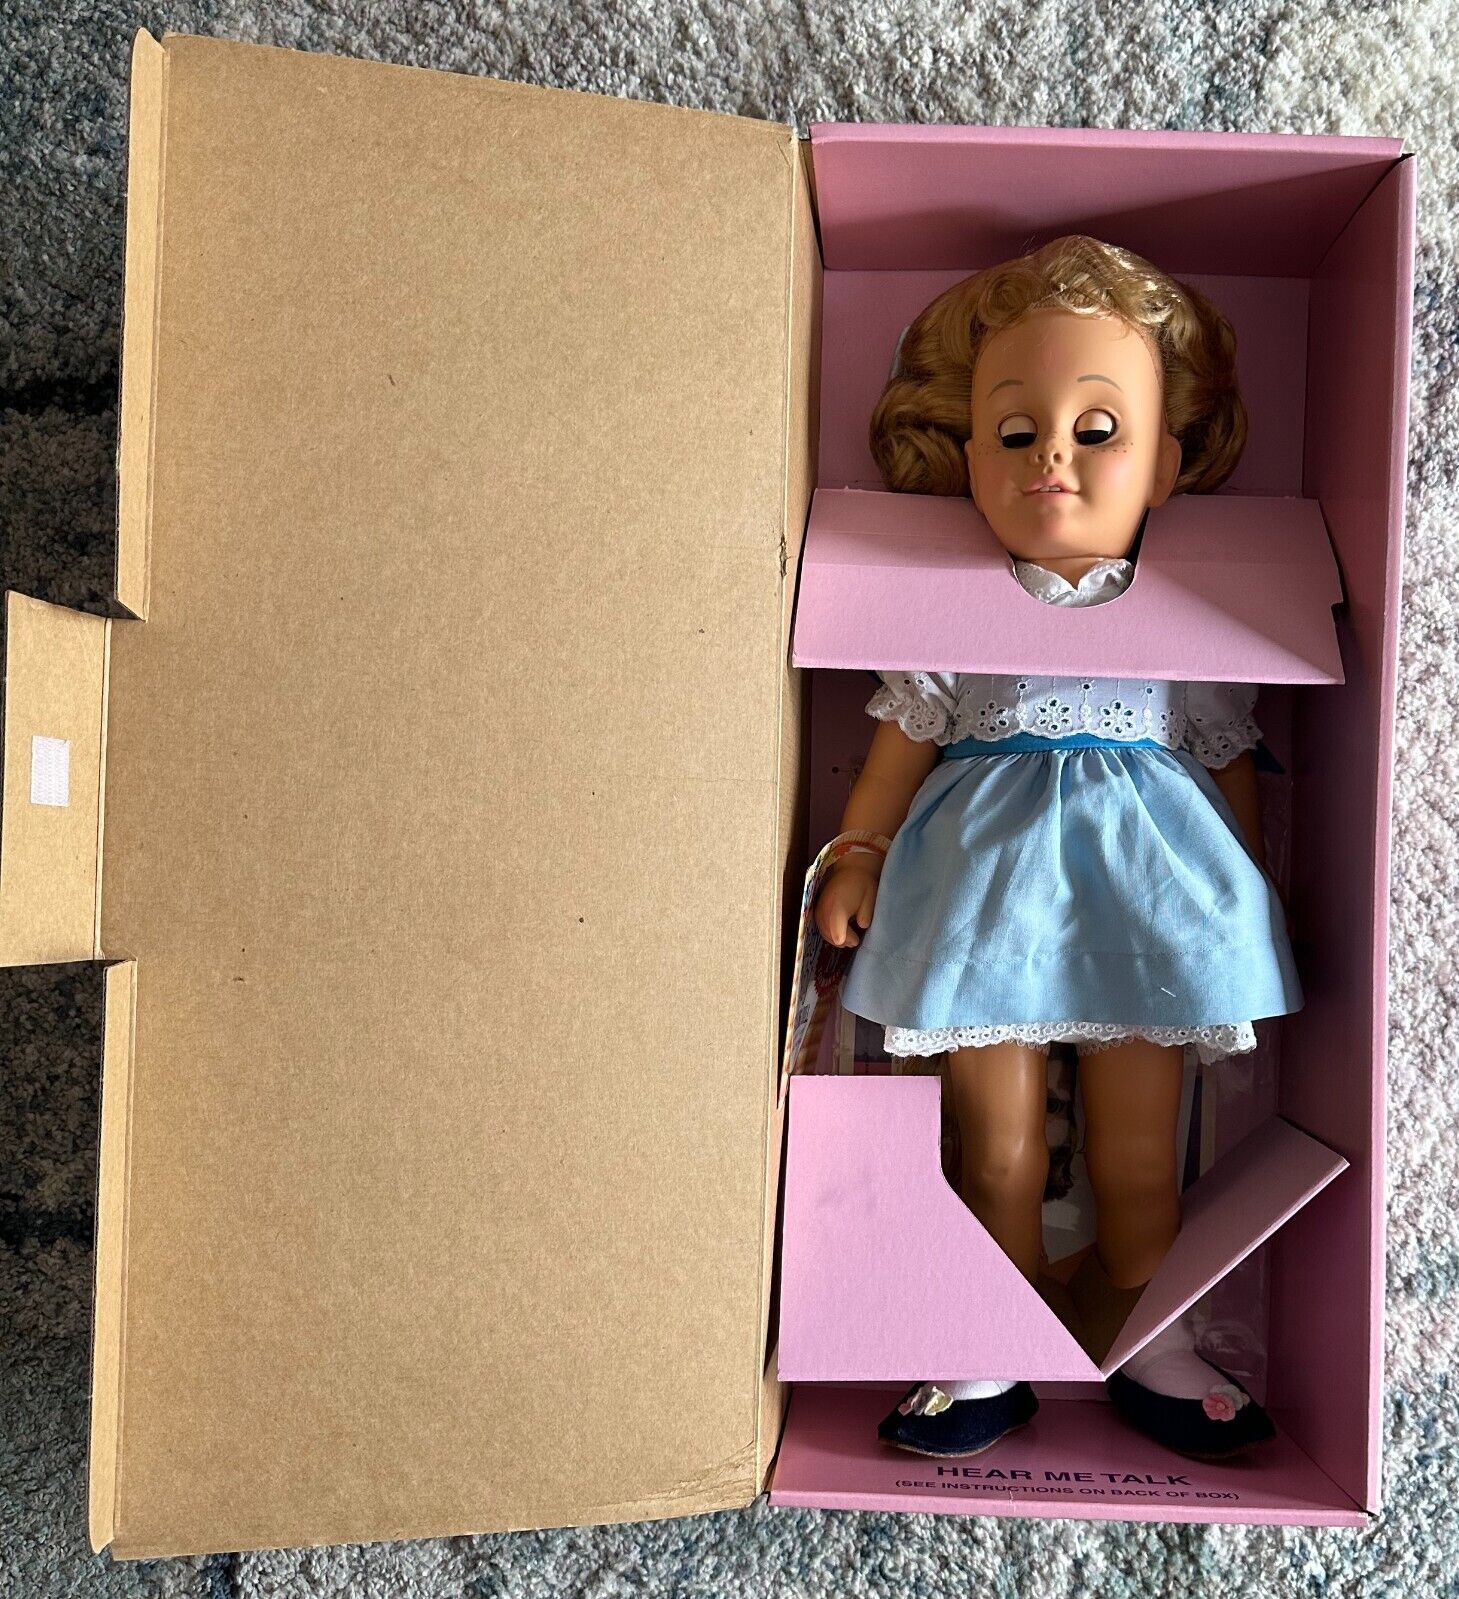 Chatty Cathy Mattel 1998 Reproduction Talking Doll Replica in Box with COA